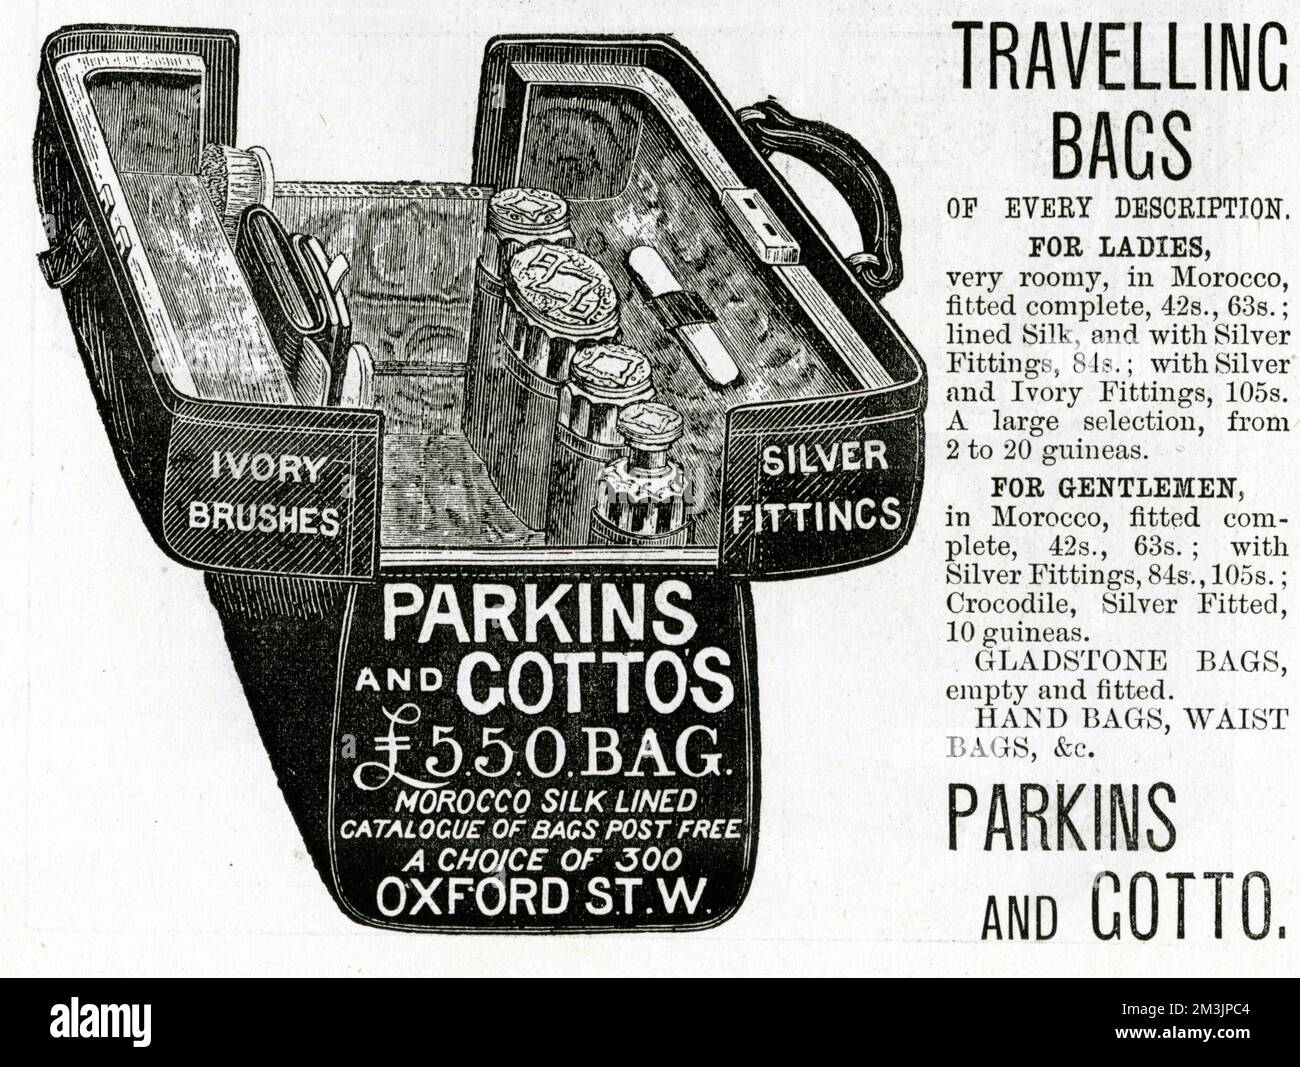 An advertisement for Parkings and Gotto, bag and luggage specialists, based in Oxford Street, with an illustration of a lady's travelling bag or vanity case.  1883 Stock Photo